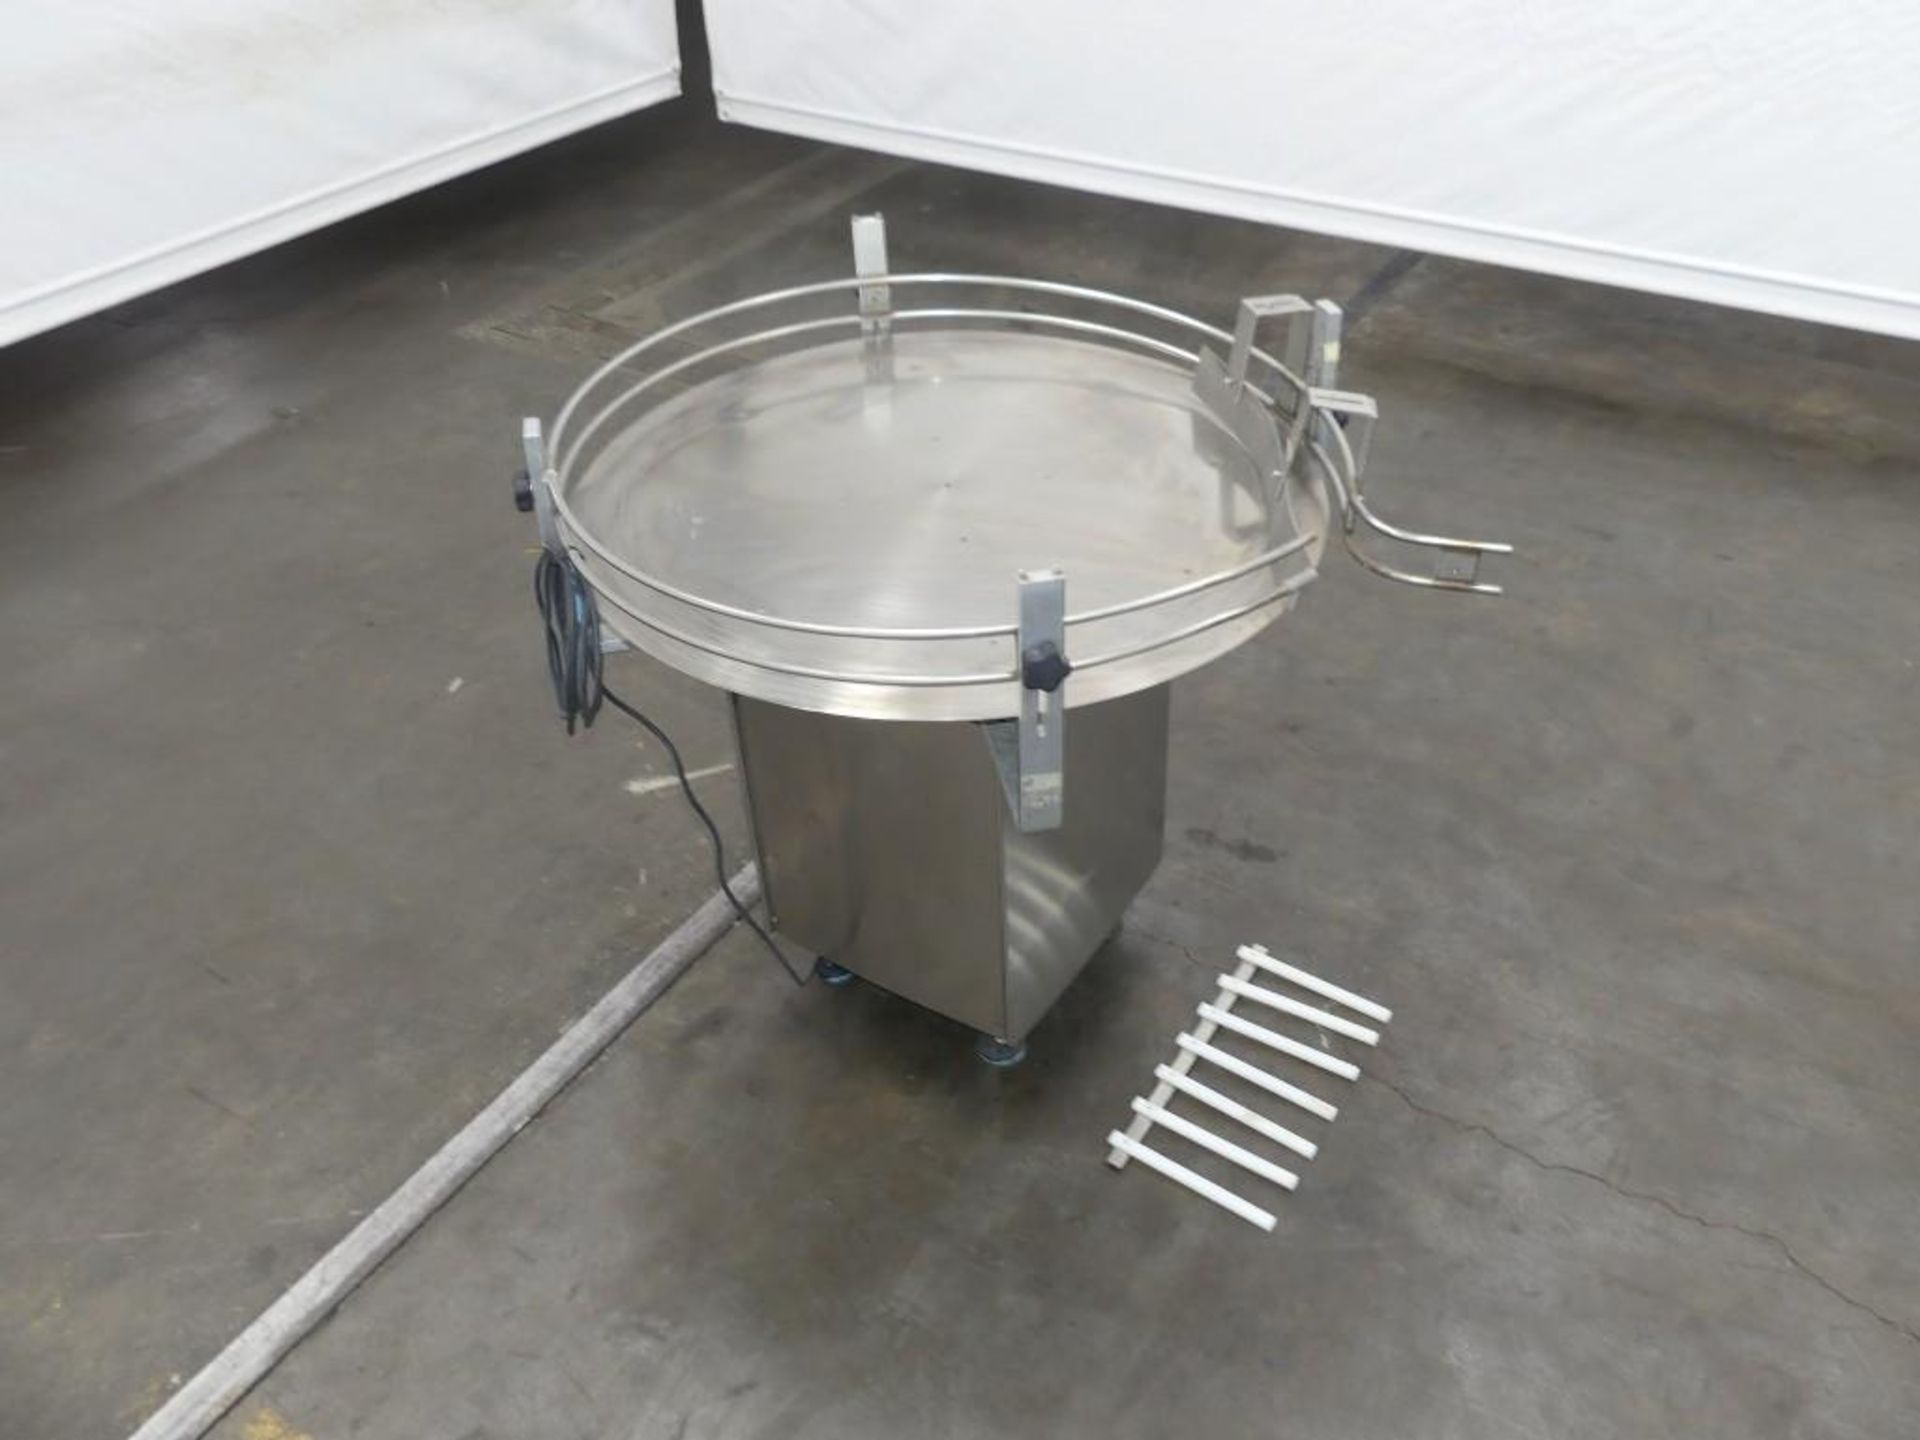 Axus 44" Stainless Steel Rotary Accumulation Table - Image 3 of 9